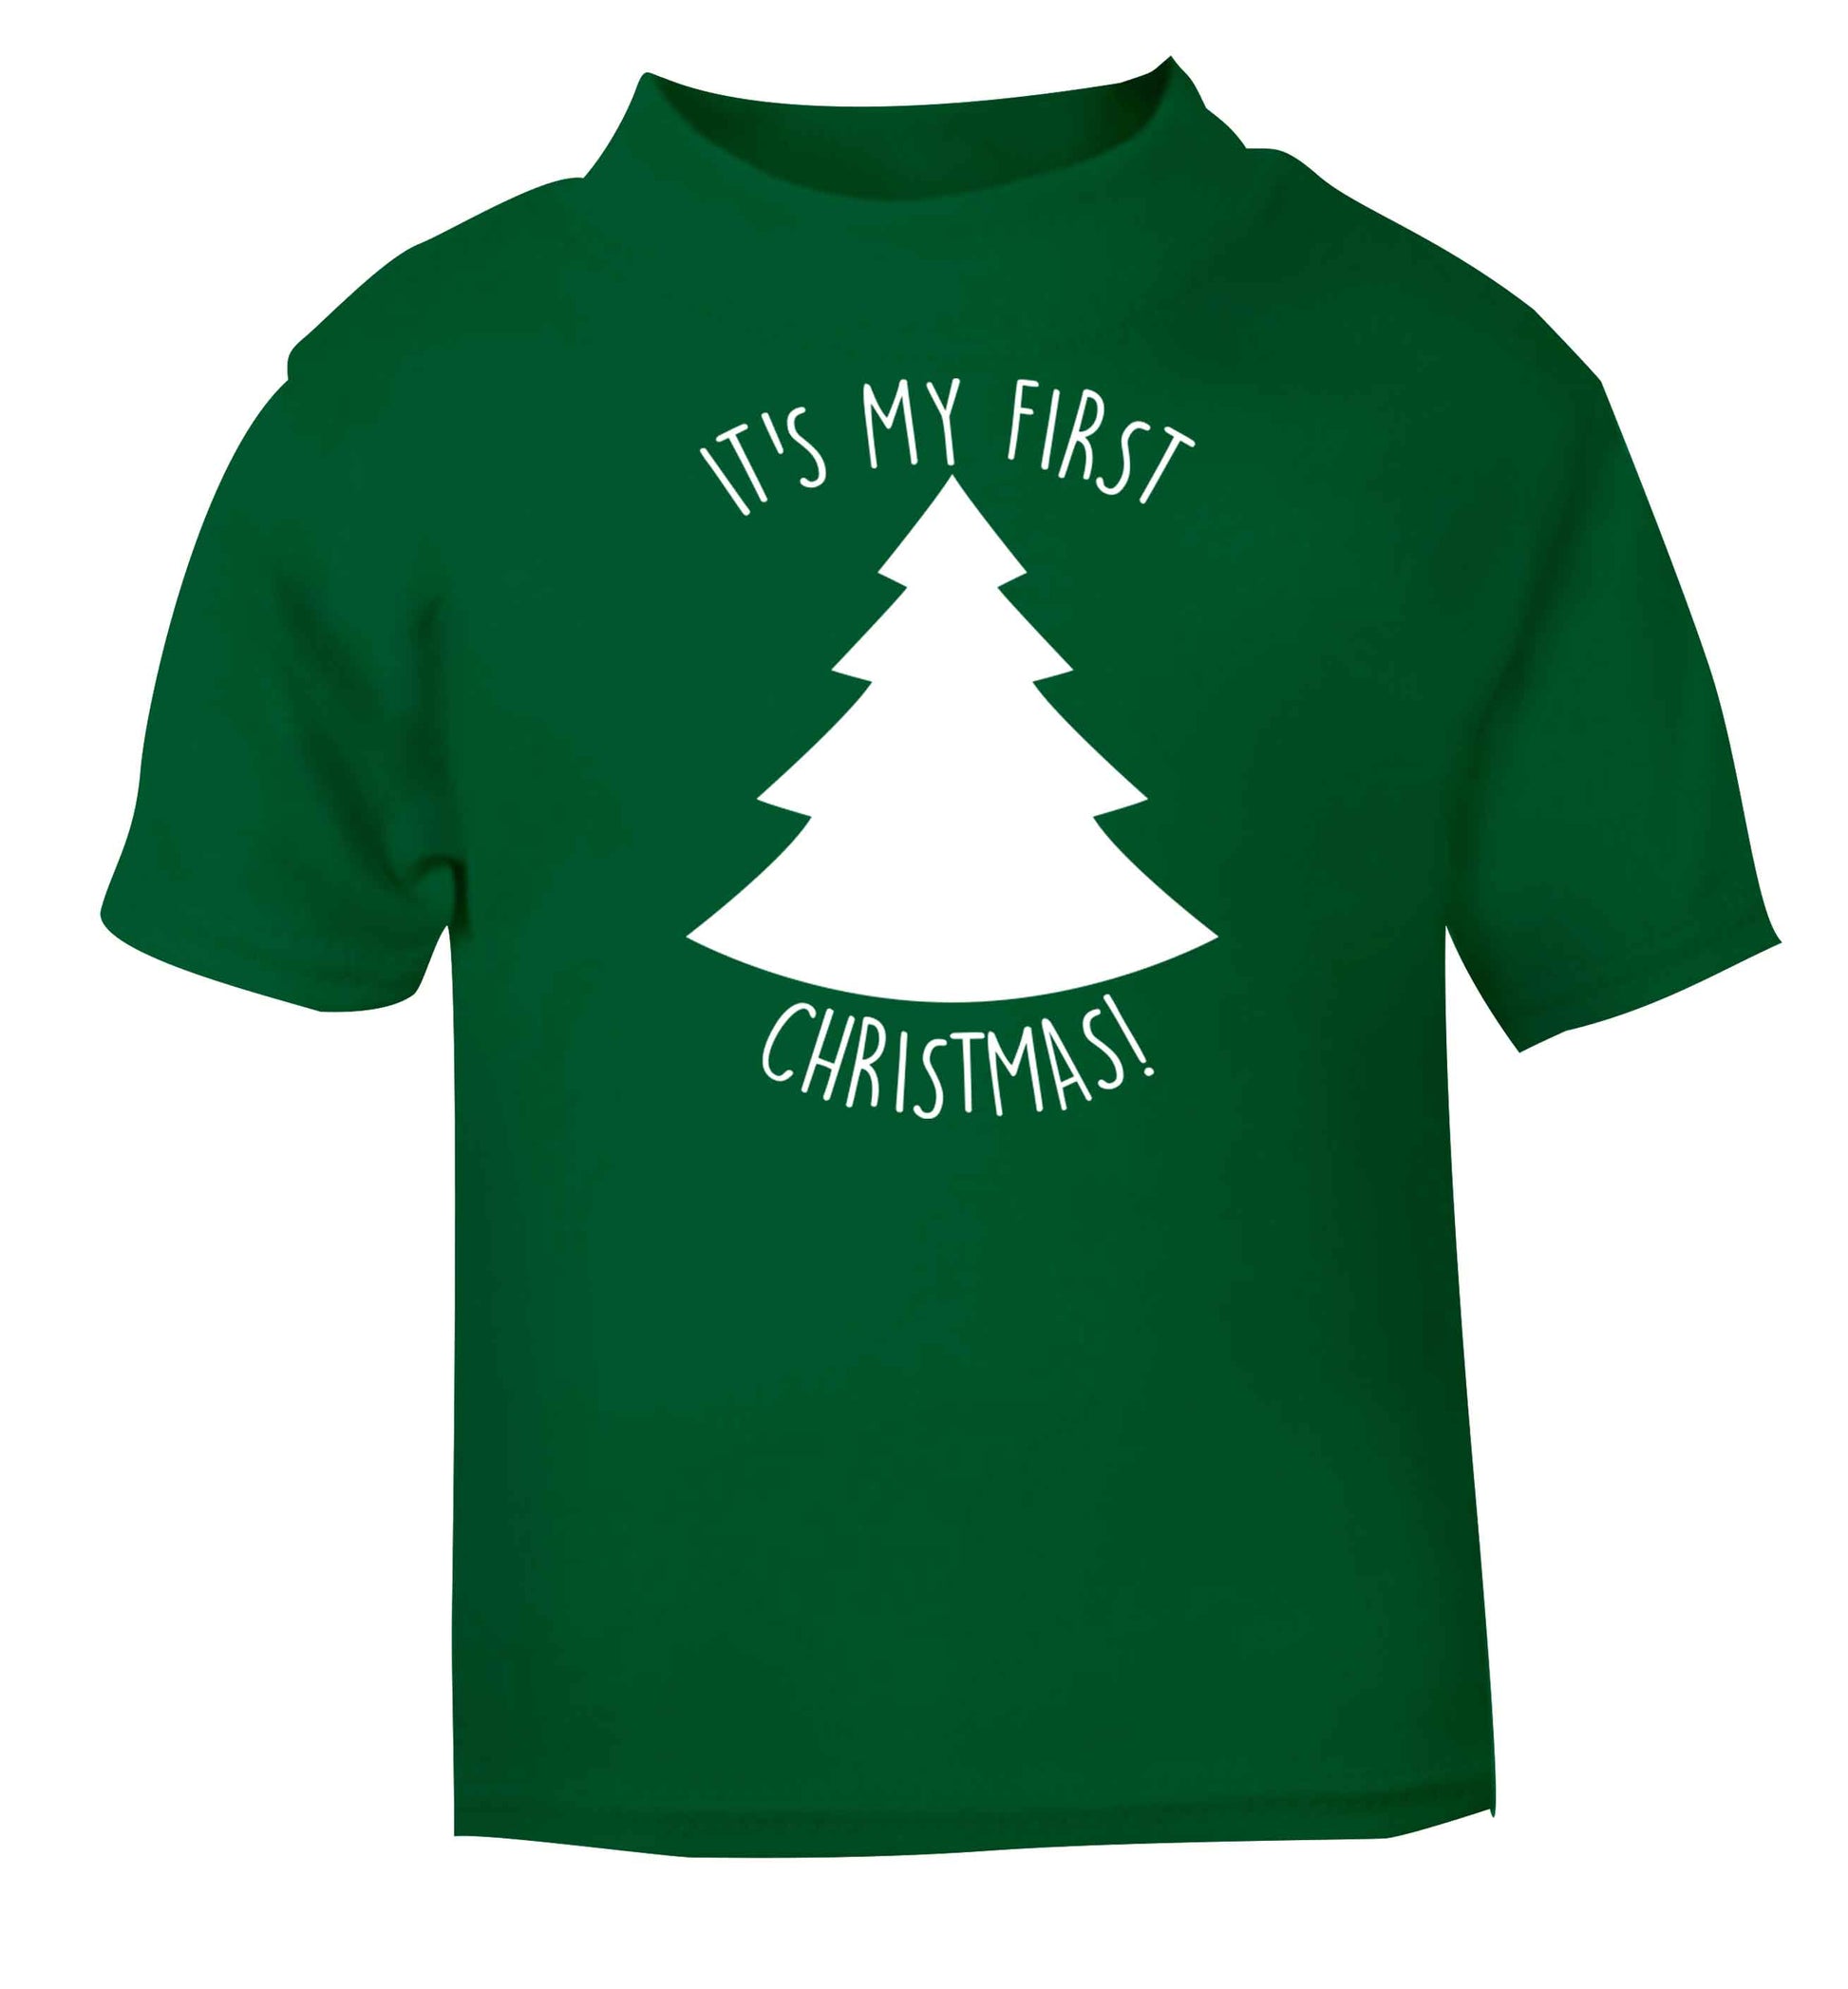 It's my first Christmas - tree green baby toddler Tshirt 2 Years